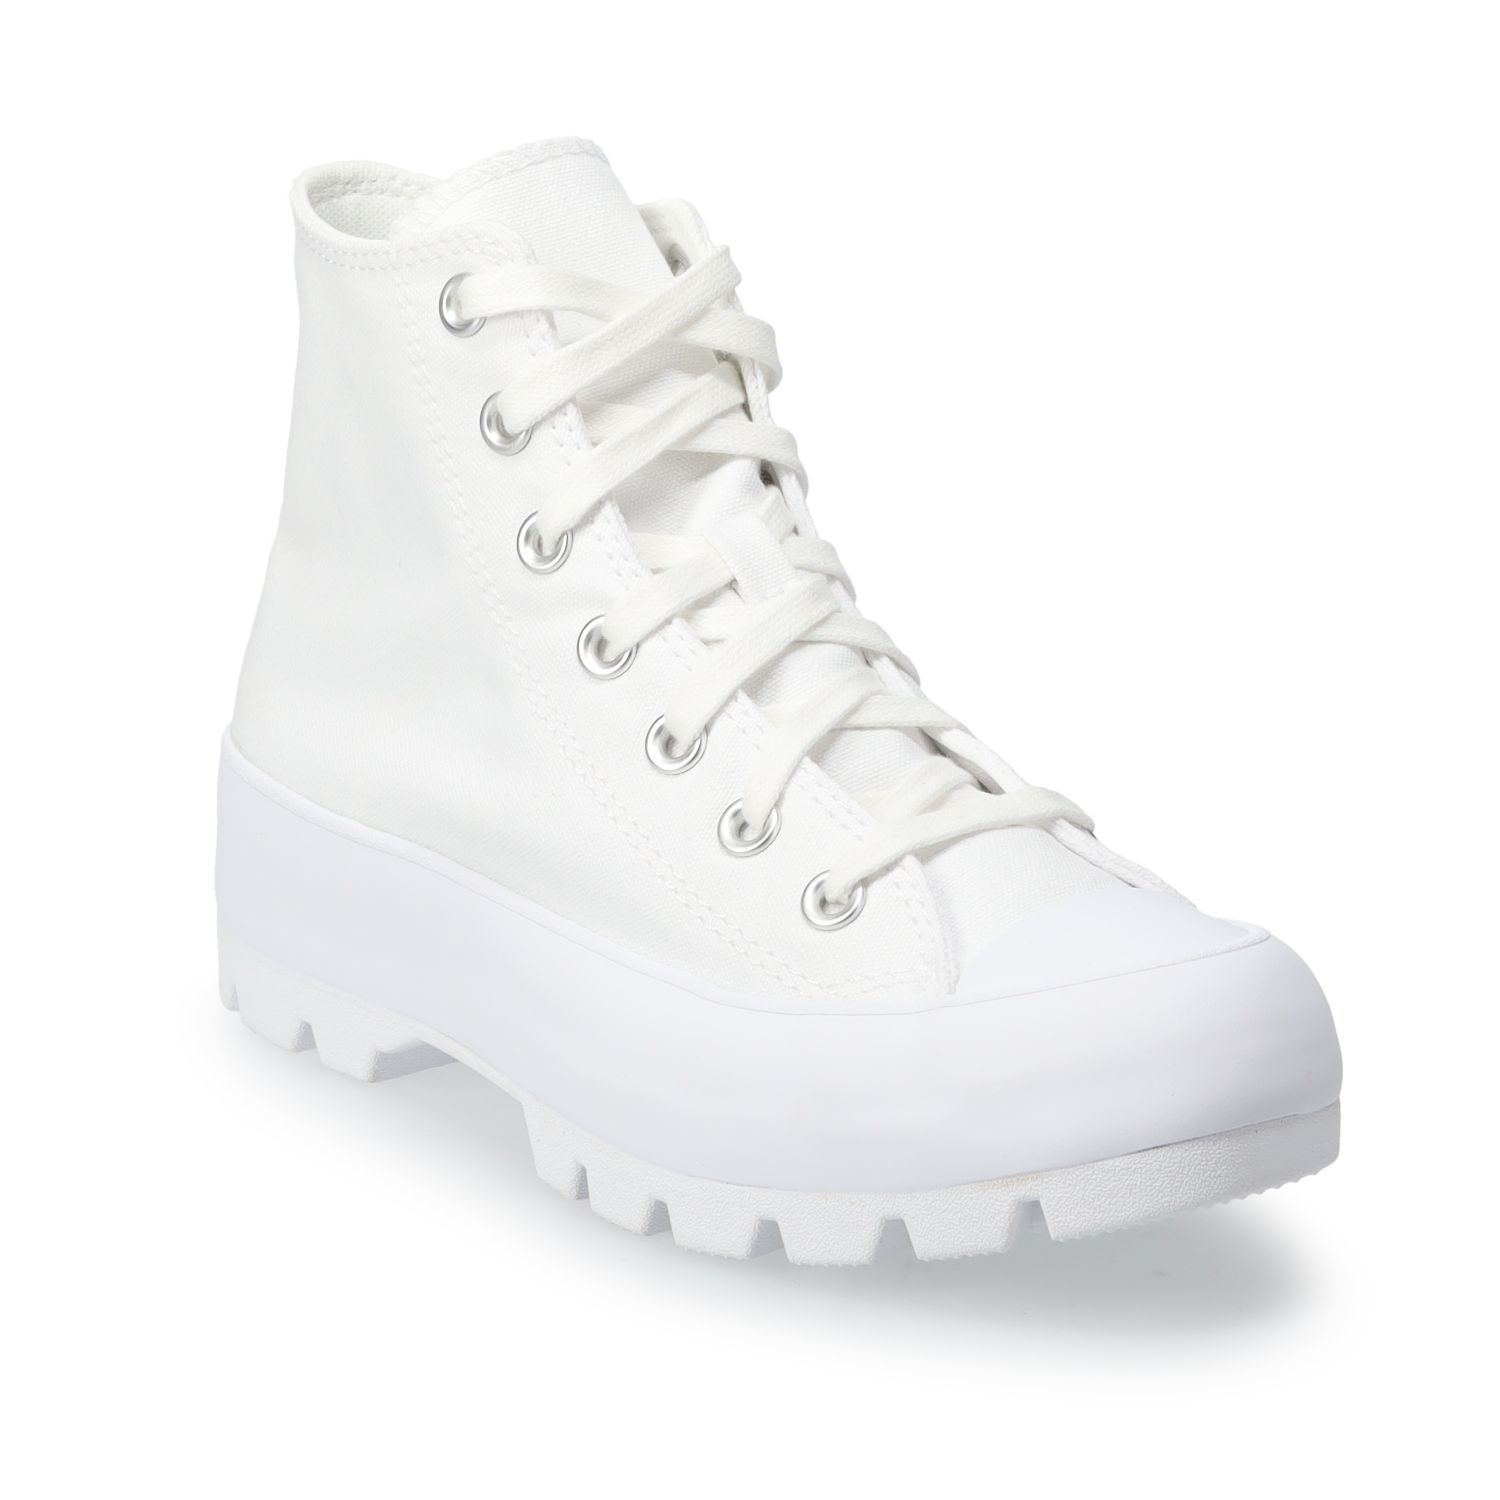 womens white converse high tops size 